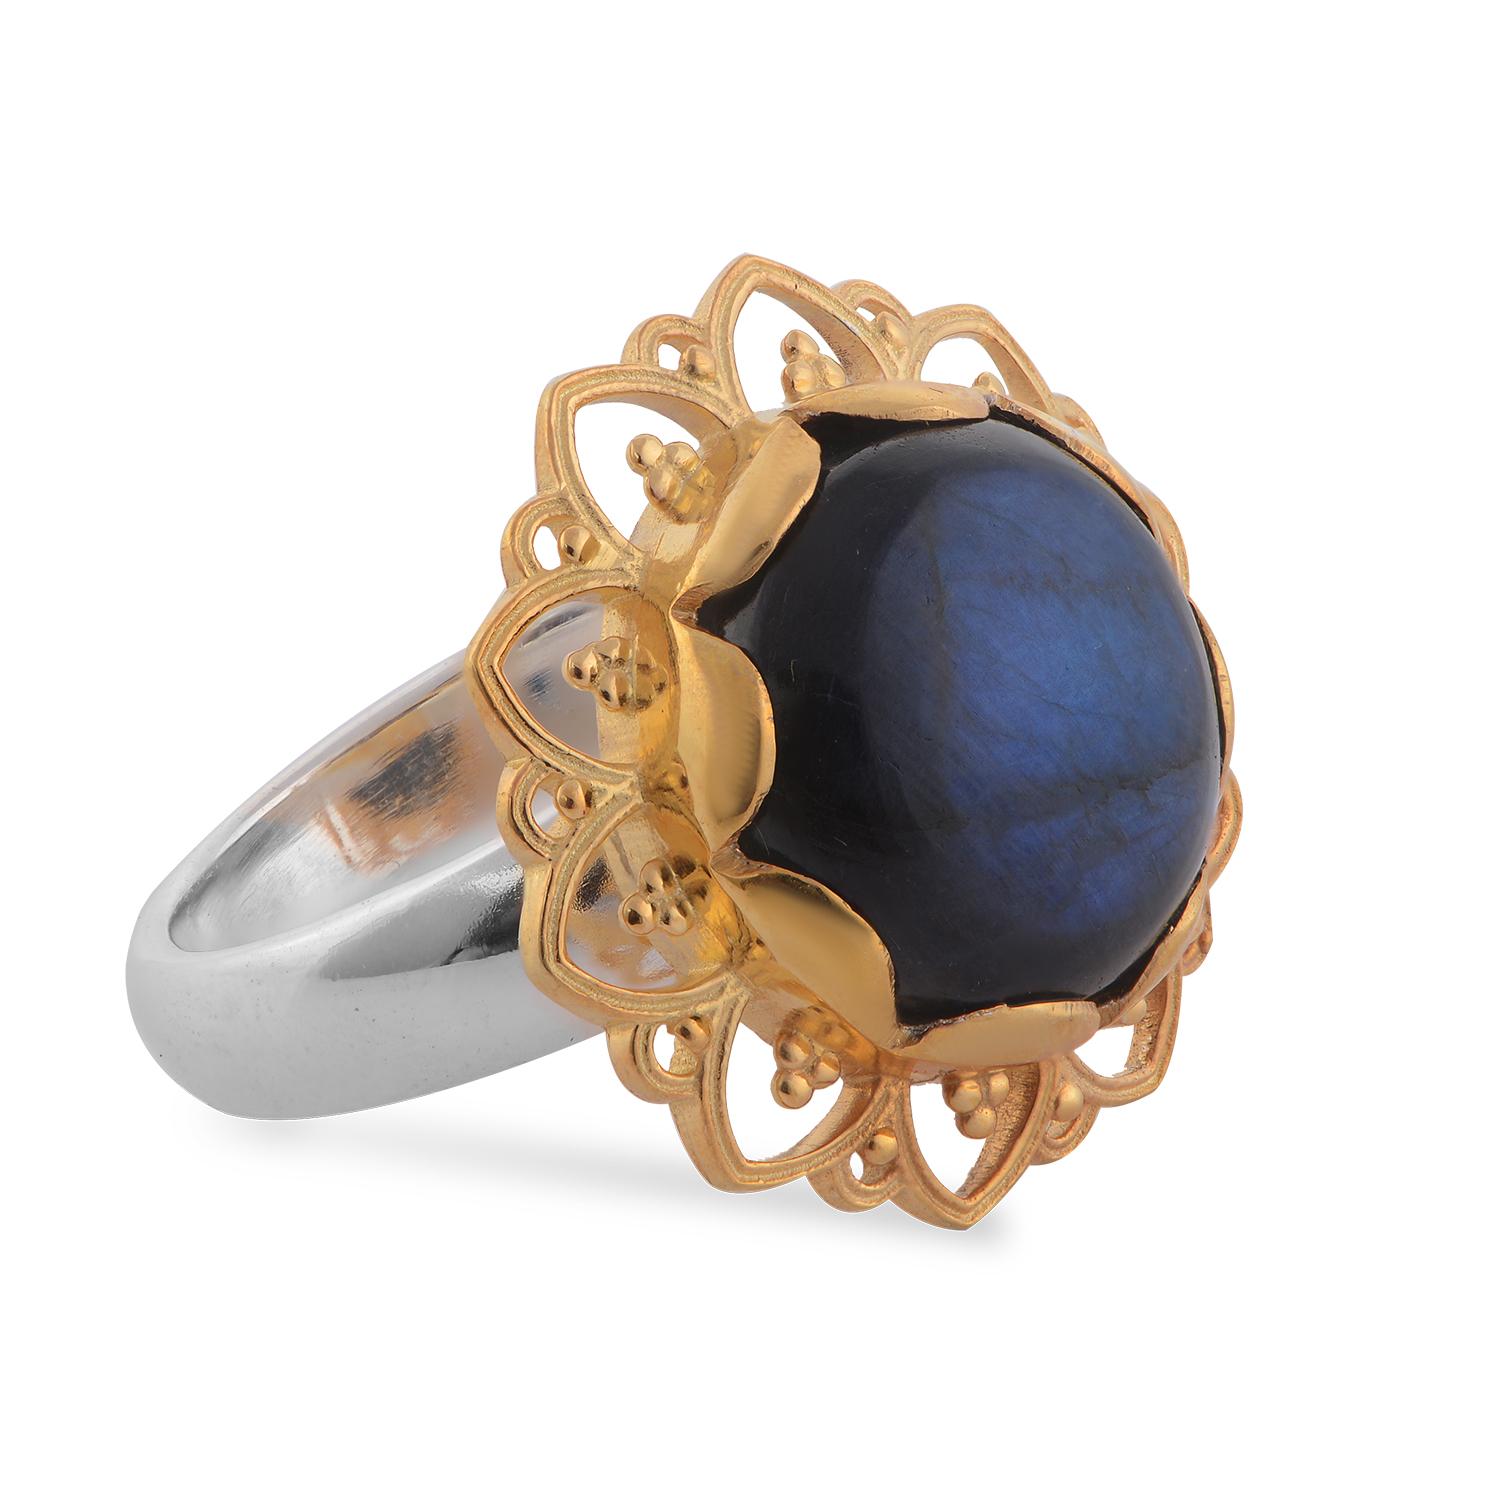 

This lovely Emma Chapman Labradorite Gold Plate Ring, has been handmade in our workshops. It has jaali and embossed work on it and is embedded with labradorite. It is made in sterling silver with 24 karat gold vermeil. The ring has matching